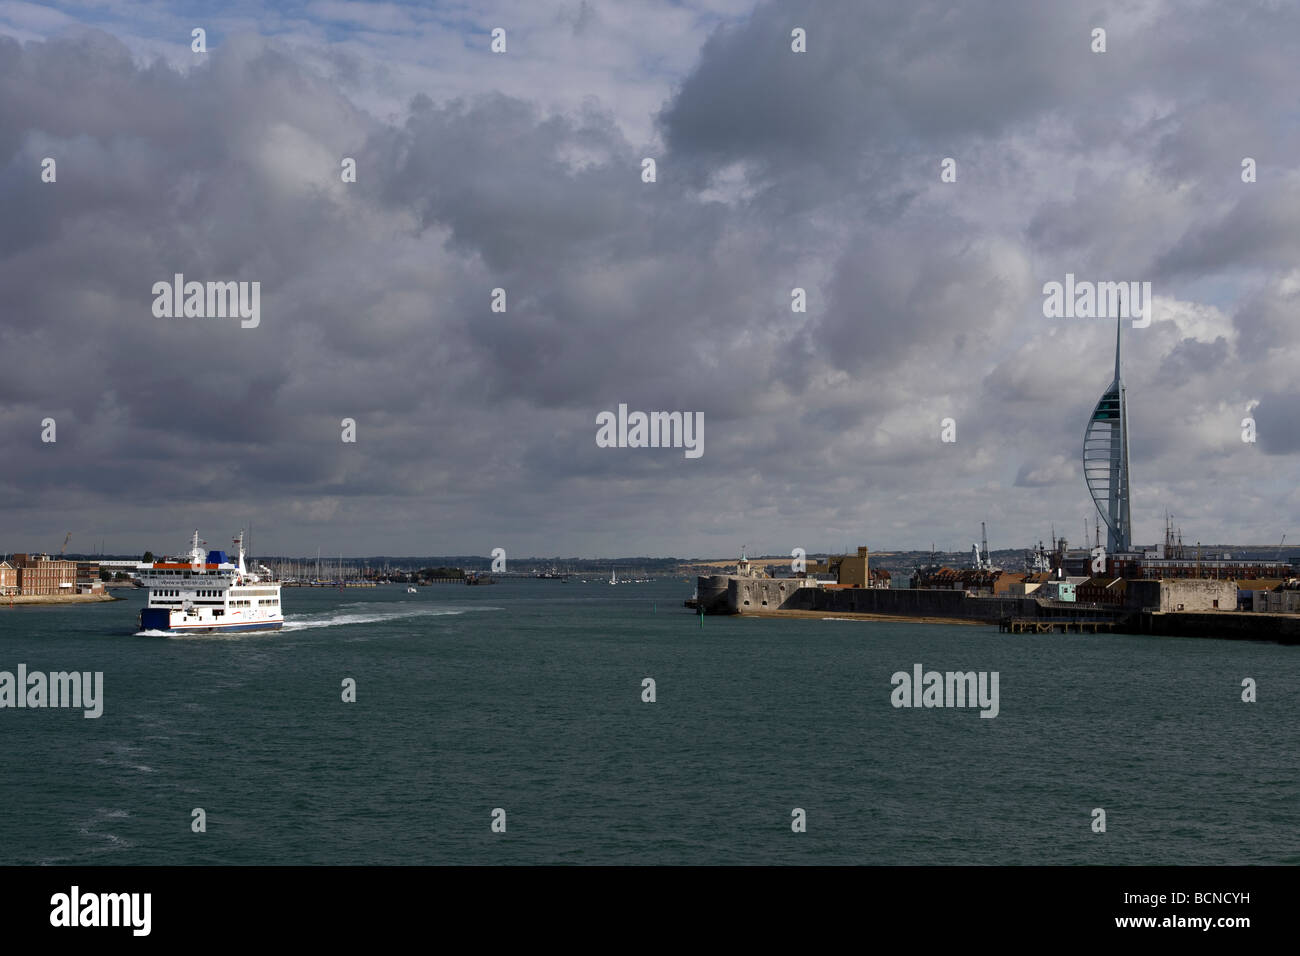 The Wightlink Isle of Wight ferry St Helen leaving Portsmouth Harbour with the landmark Spinnaker Tower on the right Stock Photo